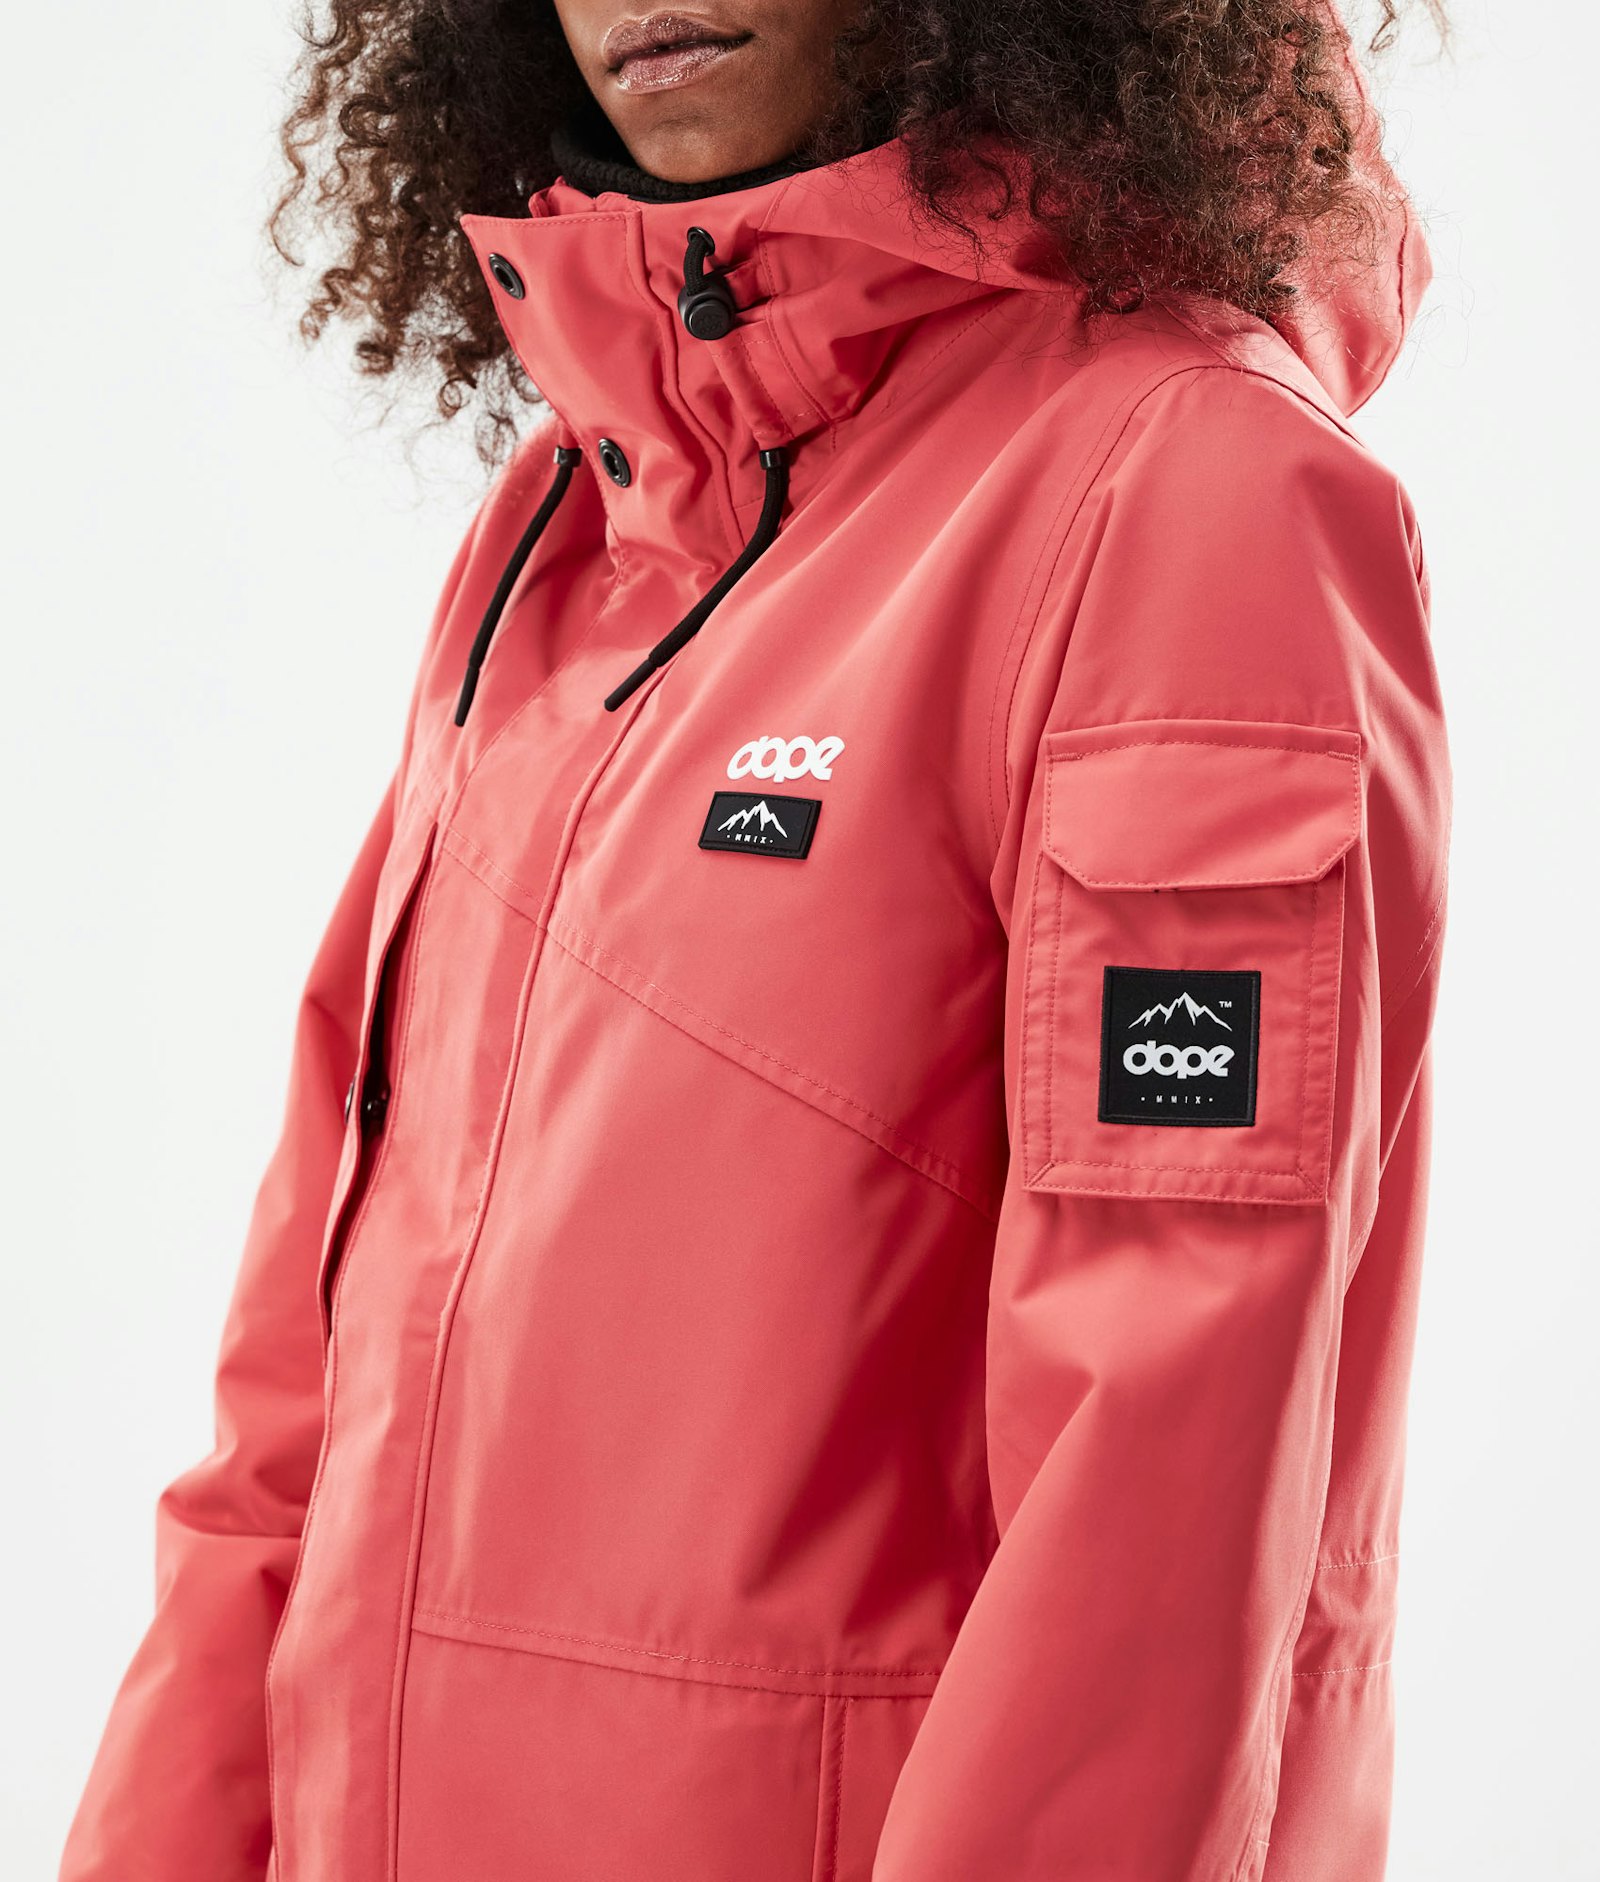 Dope Adept W 2021 Giacca Sci Donna Coral